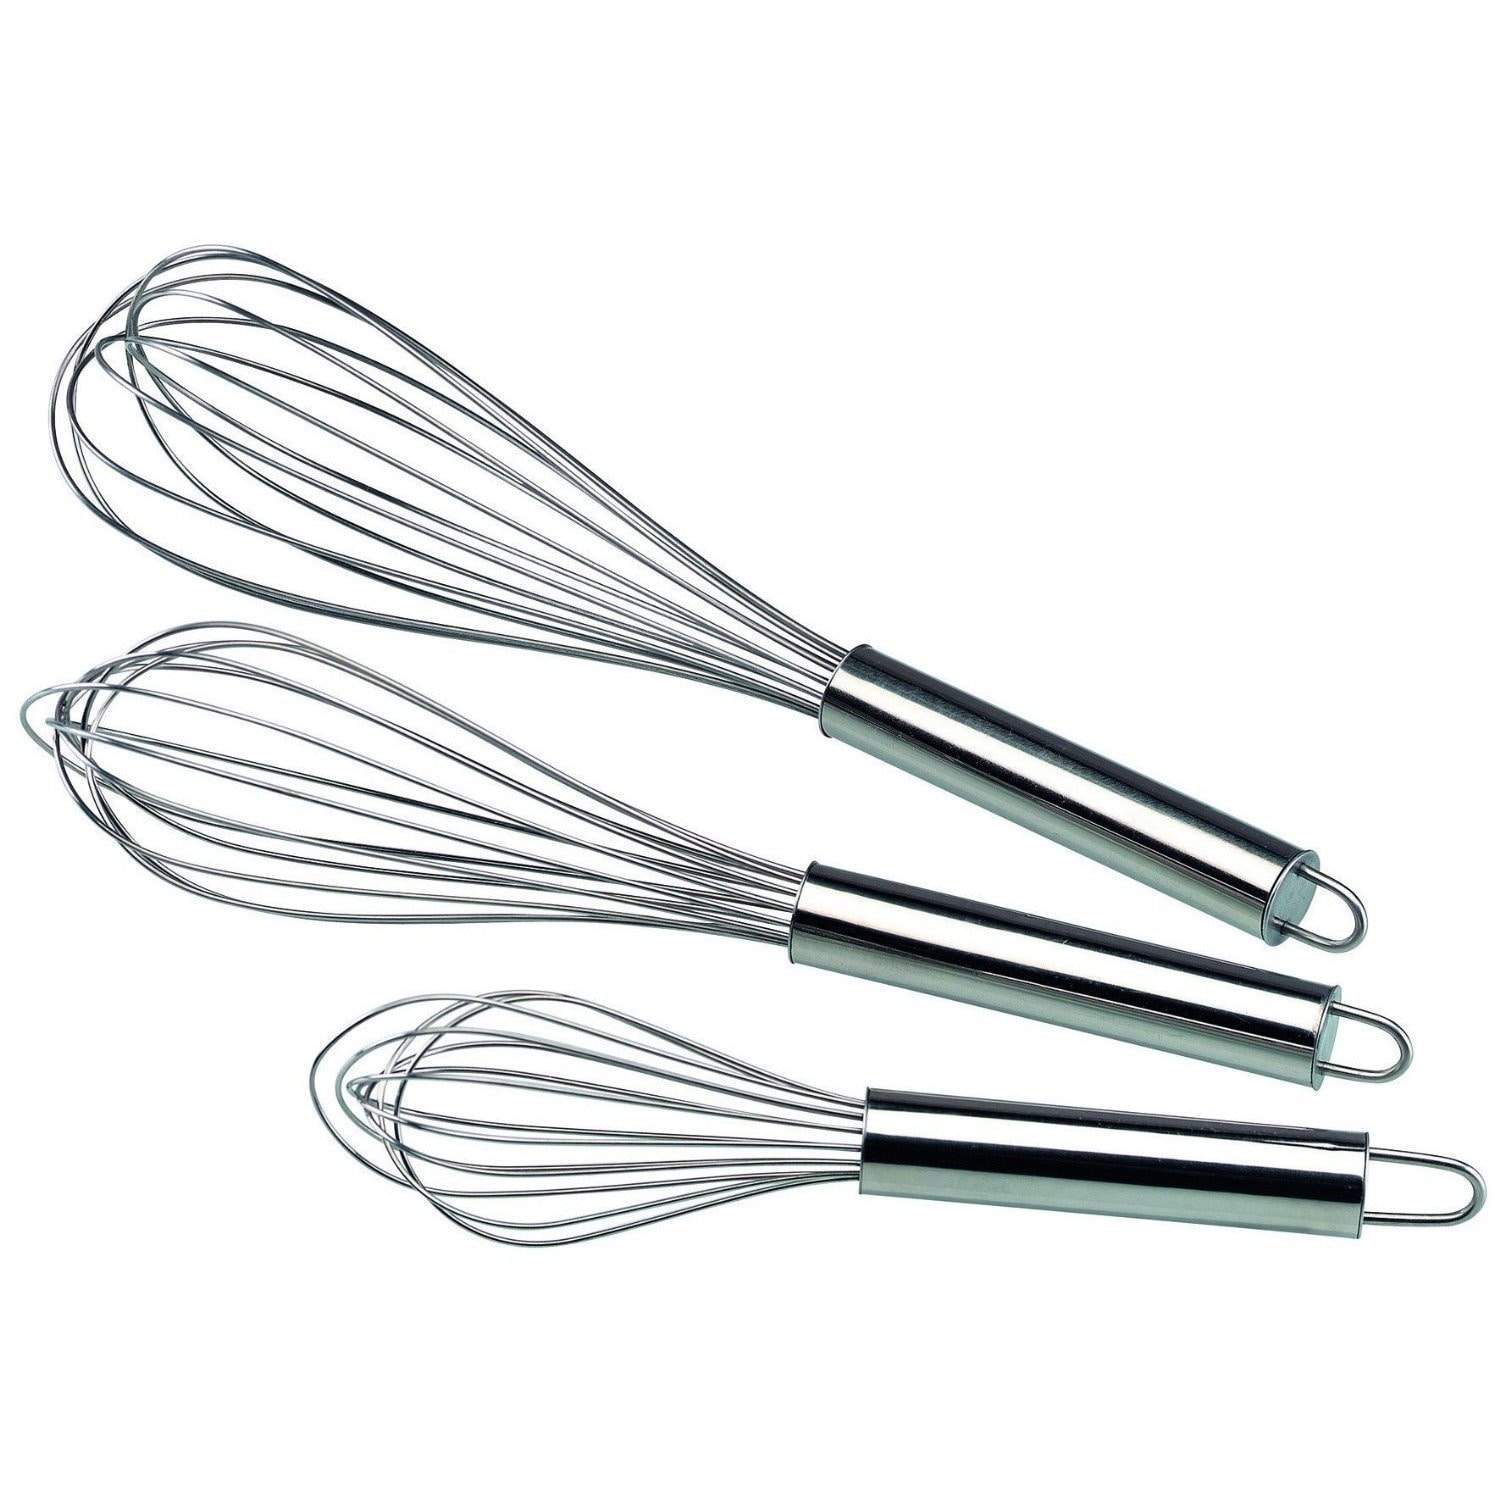 https://ak1.ostkcdn.com/images/products/9826214/Stainless-Steel-3-piece-Balloon-Wire-Whisk-Set-88e9b9d8-596f-4ec6-af4d-f182235a0306.jpg